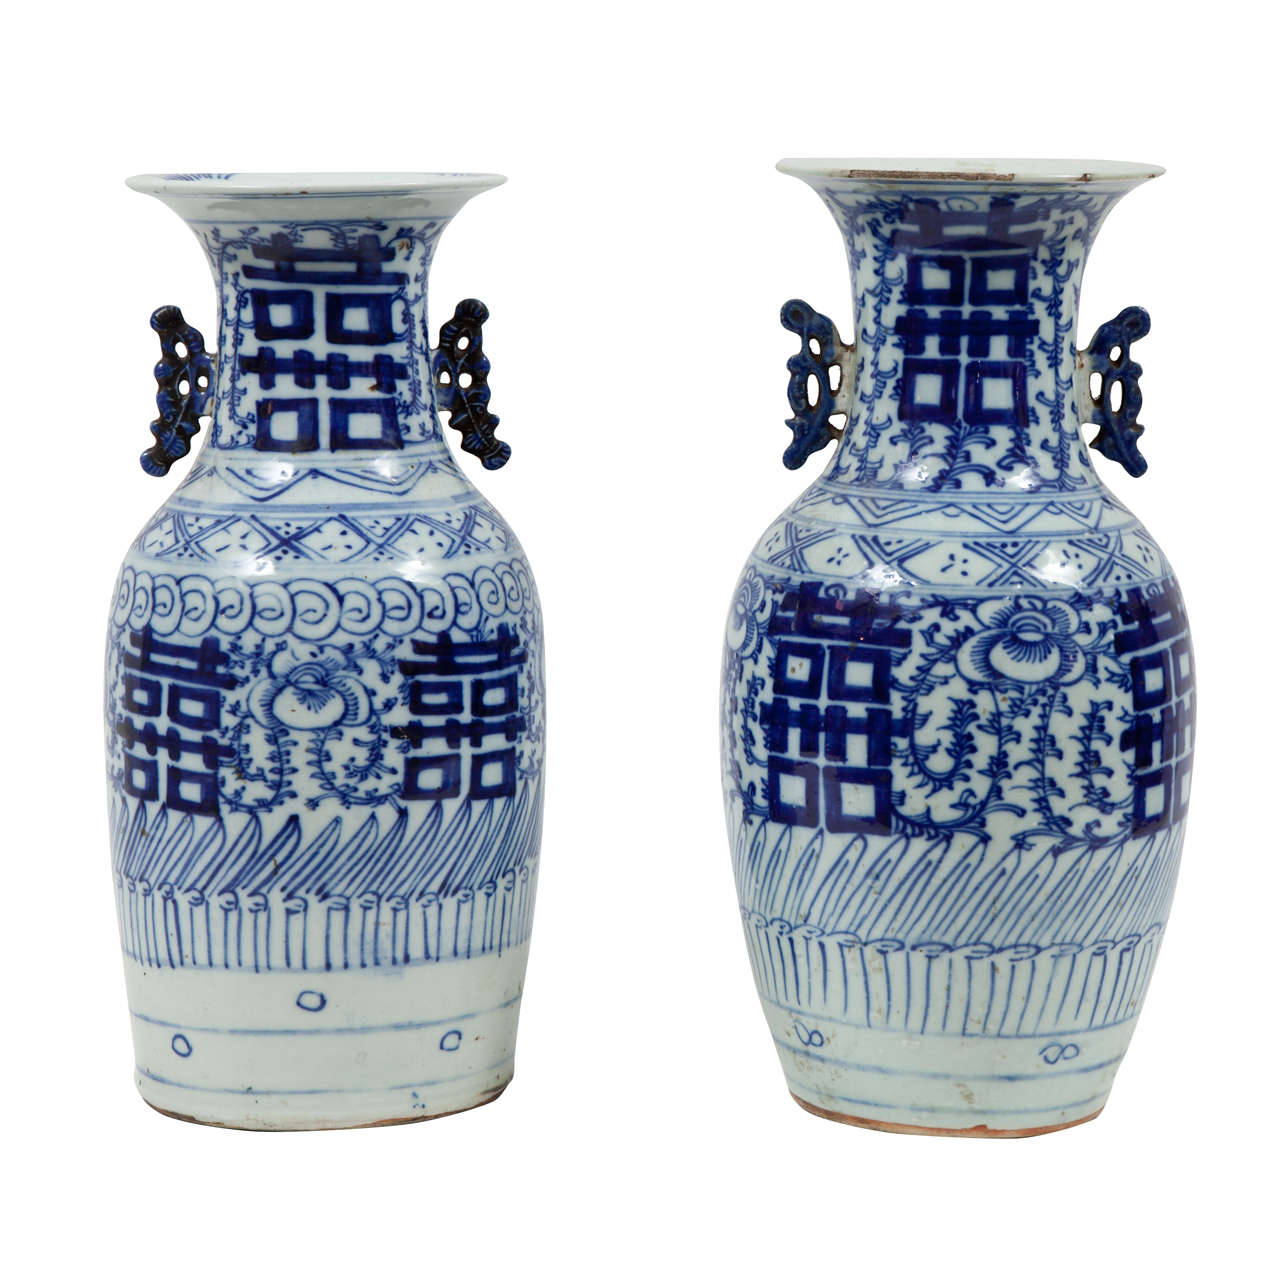 Pair of 19th Century Chinese Blue and White Porcelain Vases